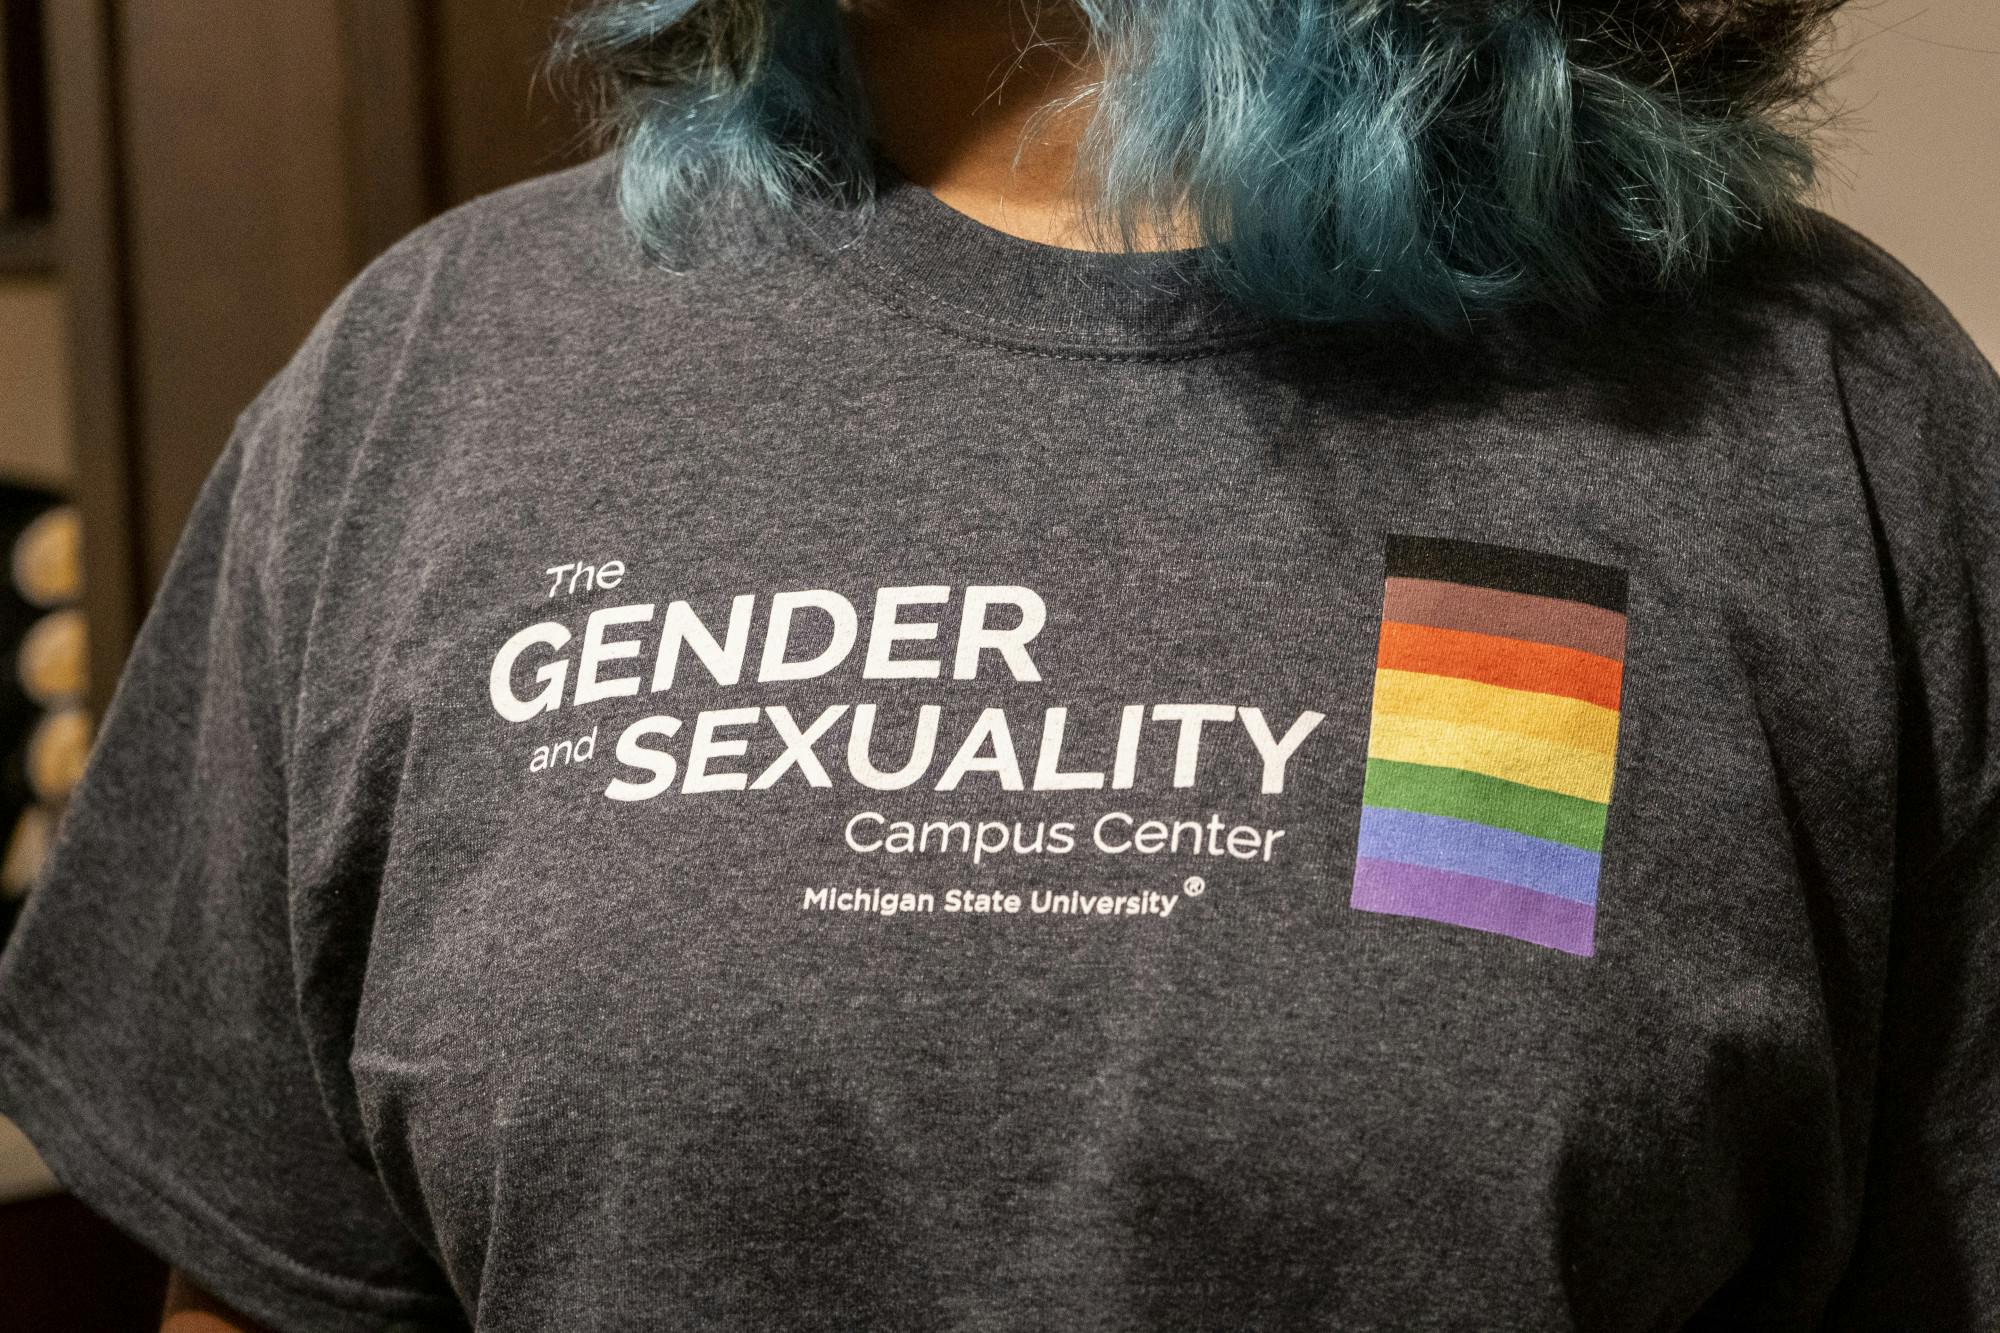 Ovya Venkat wearing a shirt for the Gender and Sexuality Campus Center on Sept. 21, 2021. 